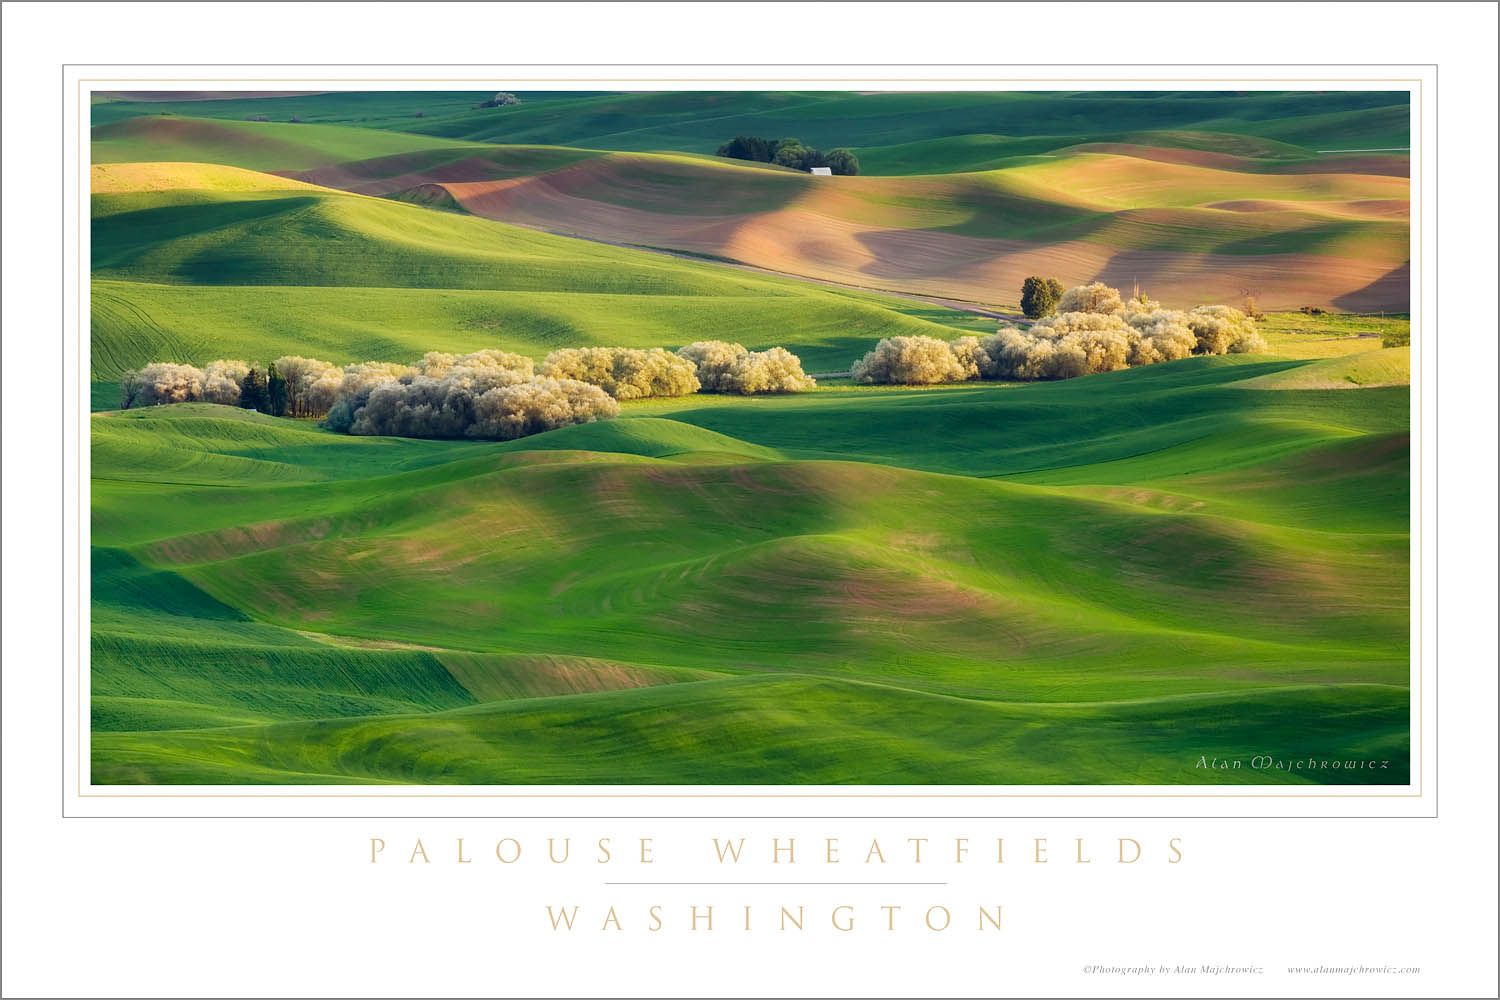 Rolling hills of green wheat fields seen from Steptoe Butte, the Palouse region of the Inland Empire of Washington